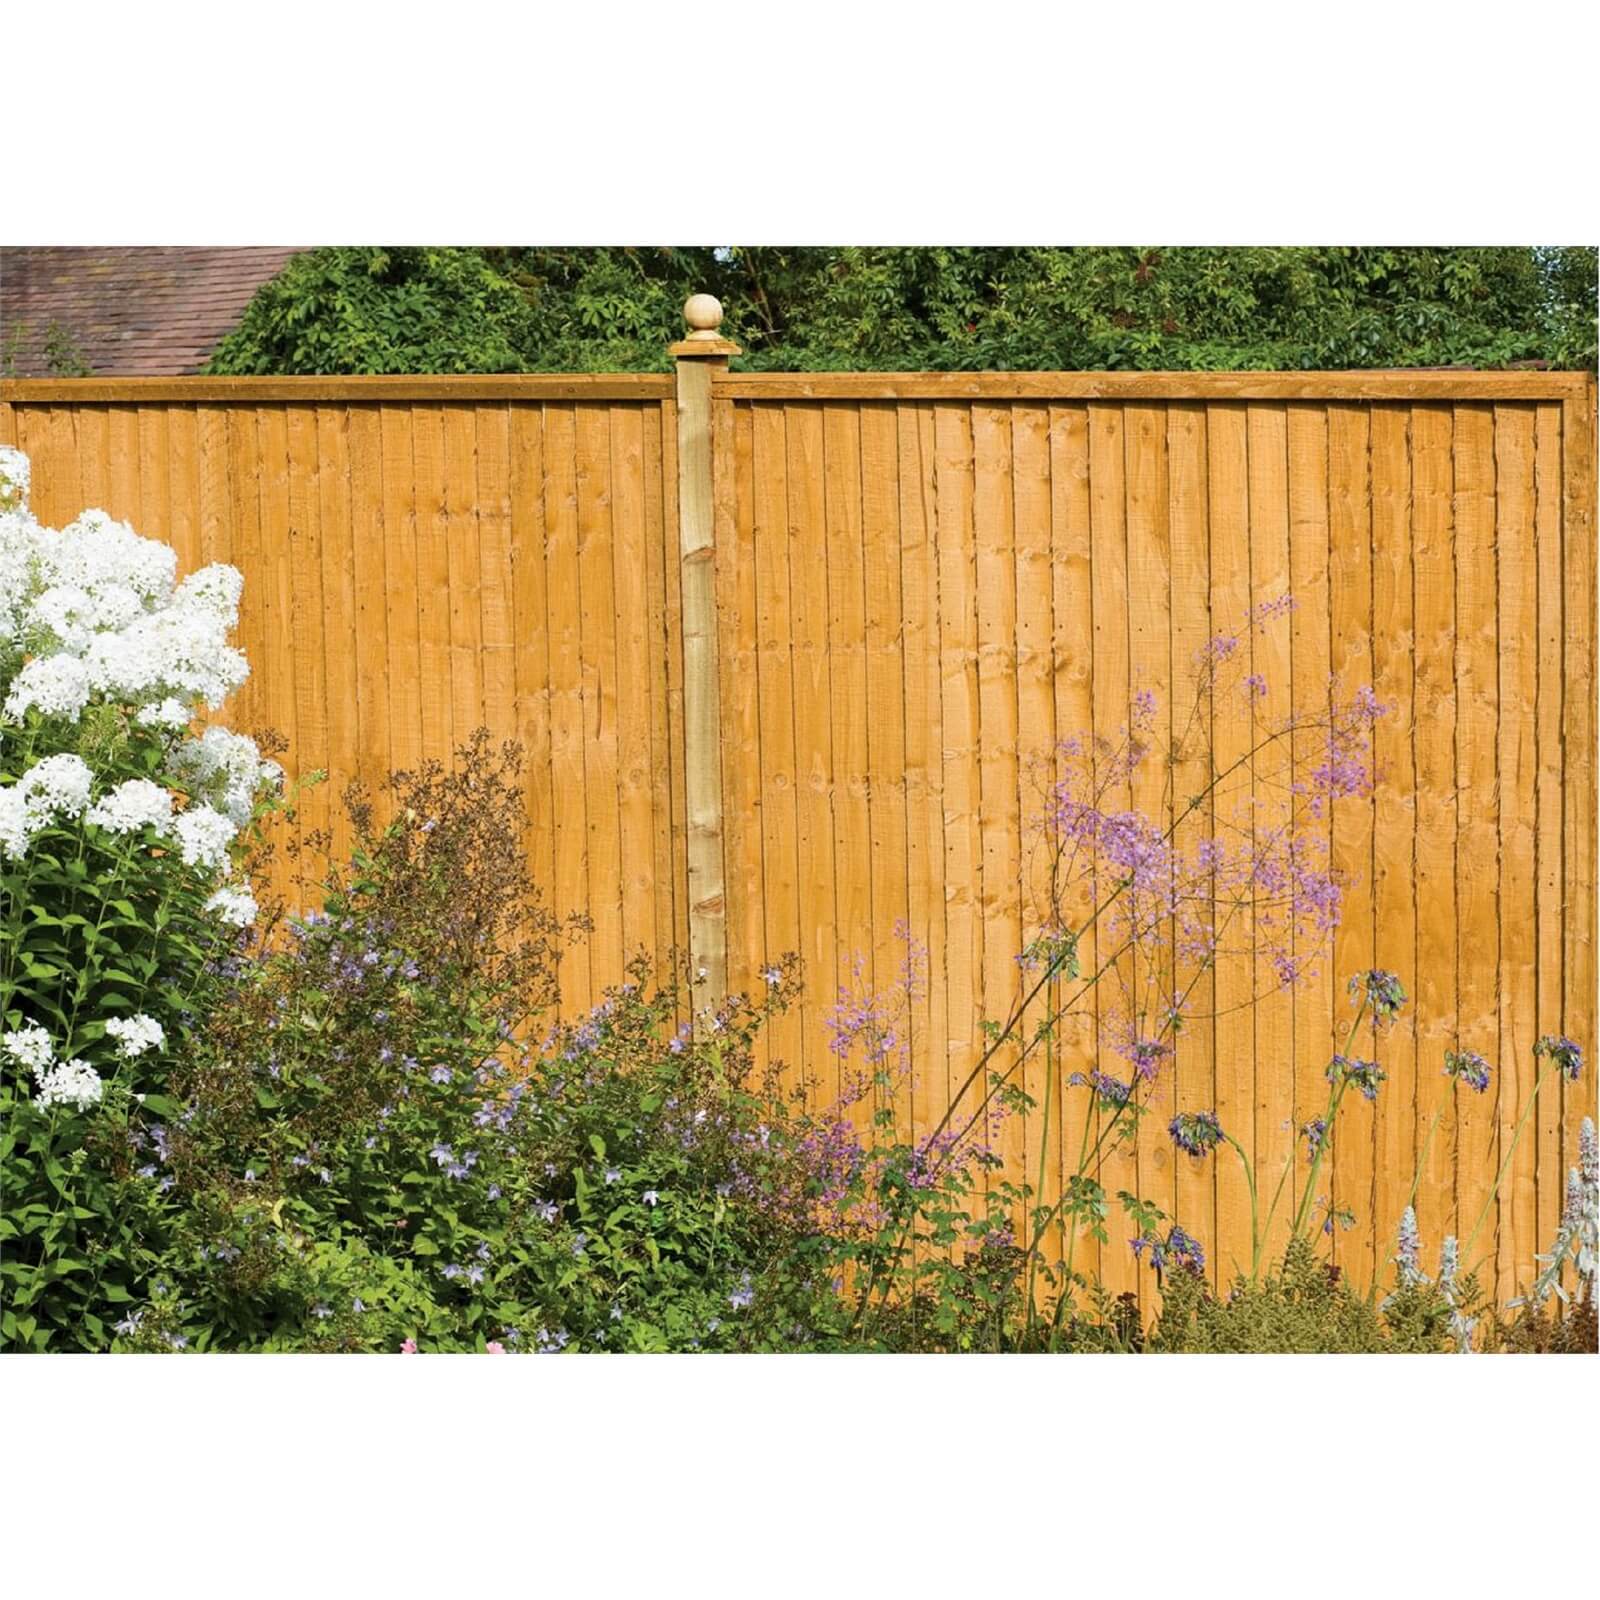 Forest Larchlap Closeboard 1.8m Fence Panel - Pack of 5